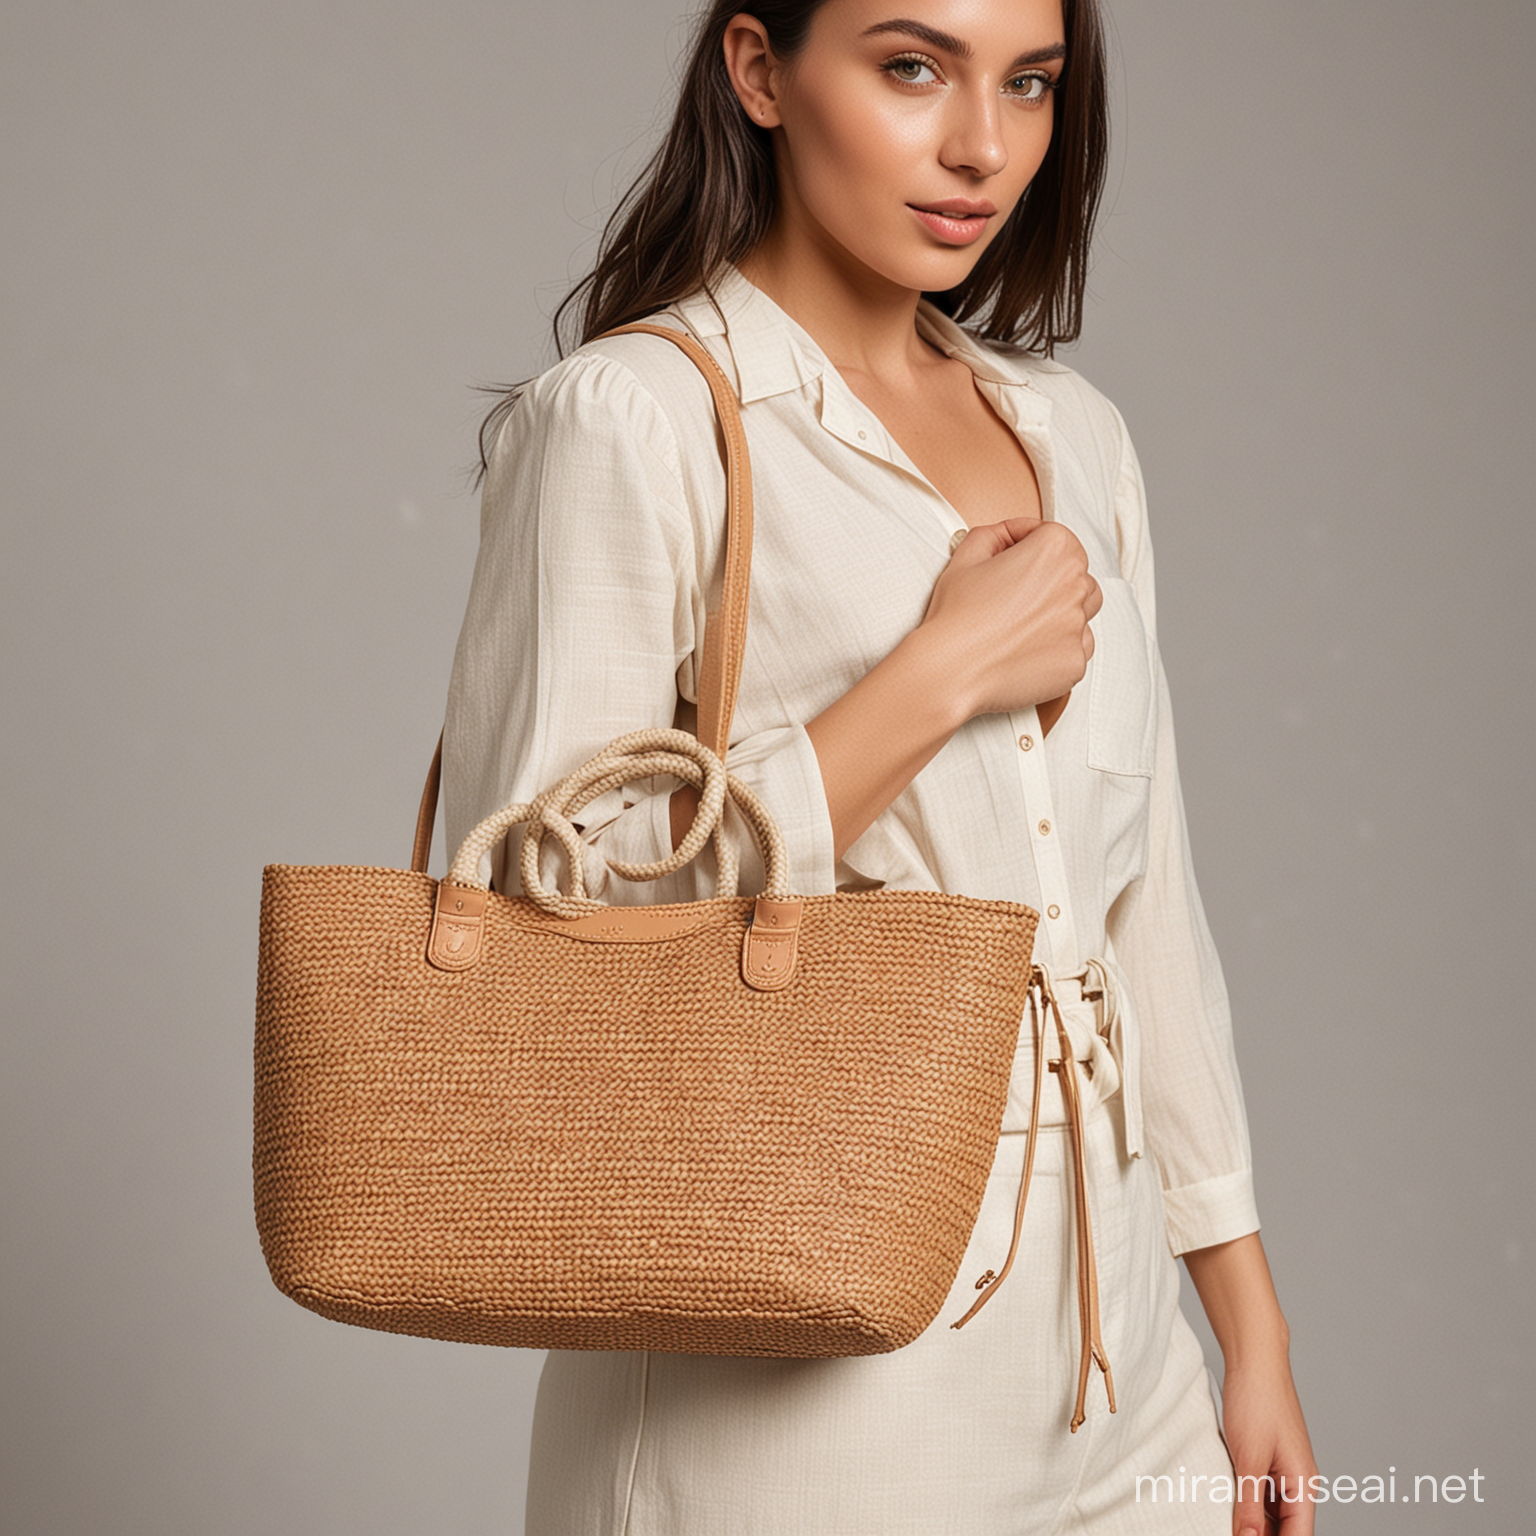 Rafia bags with vegan leather, a naked girl